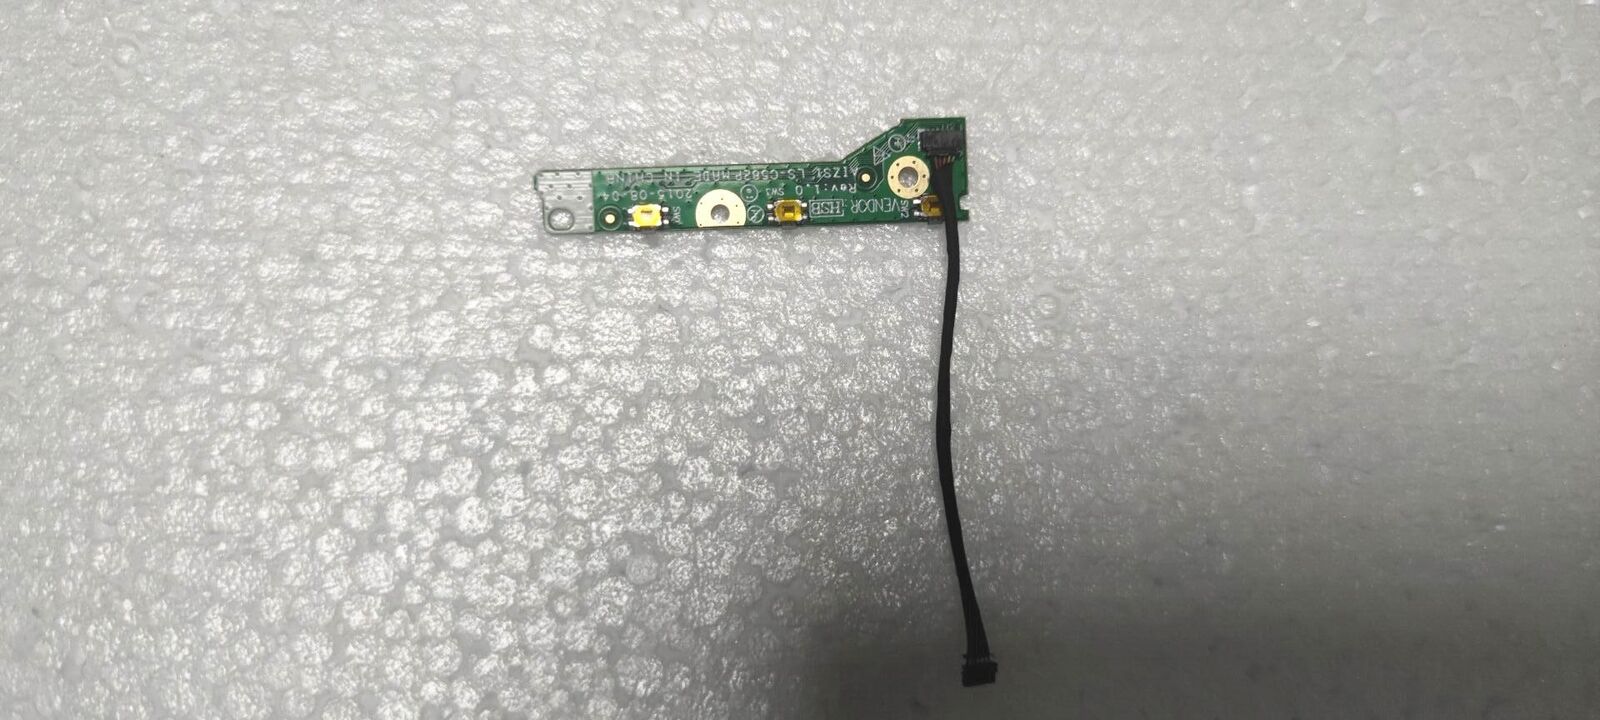 for Lenovo ThinkPad Yoga 260 Power Button Switch Board With Cable ls-c582p  774756480491 | eBay